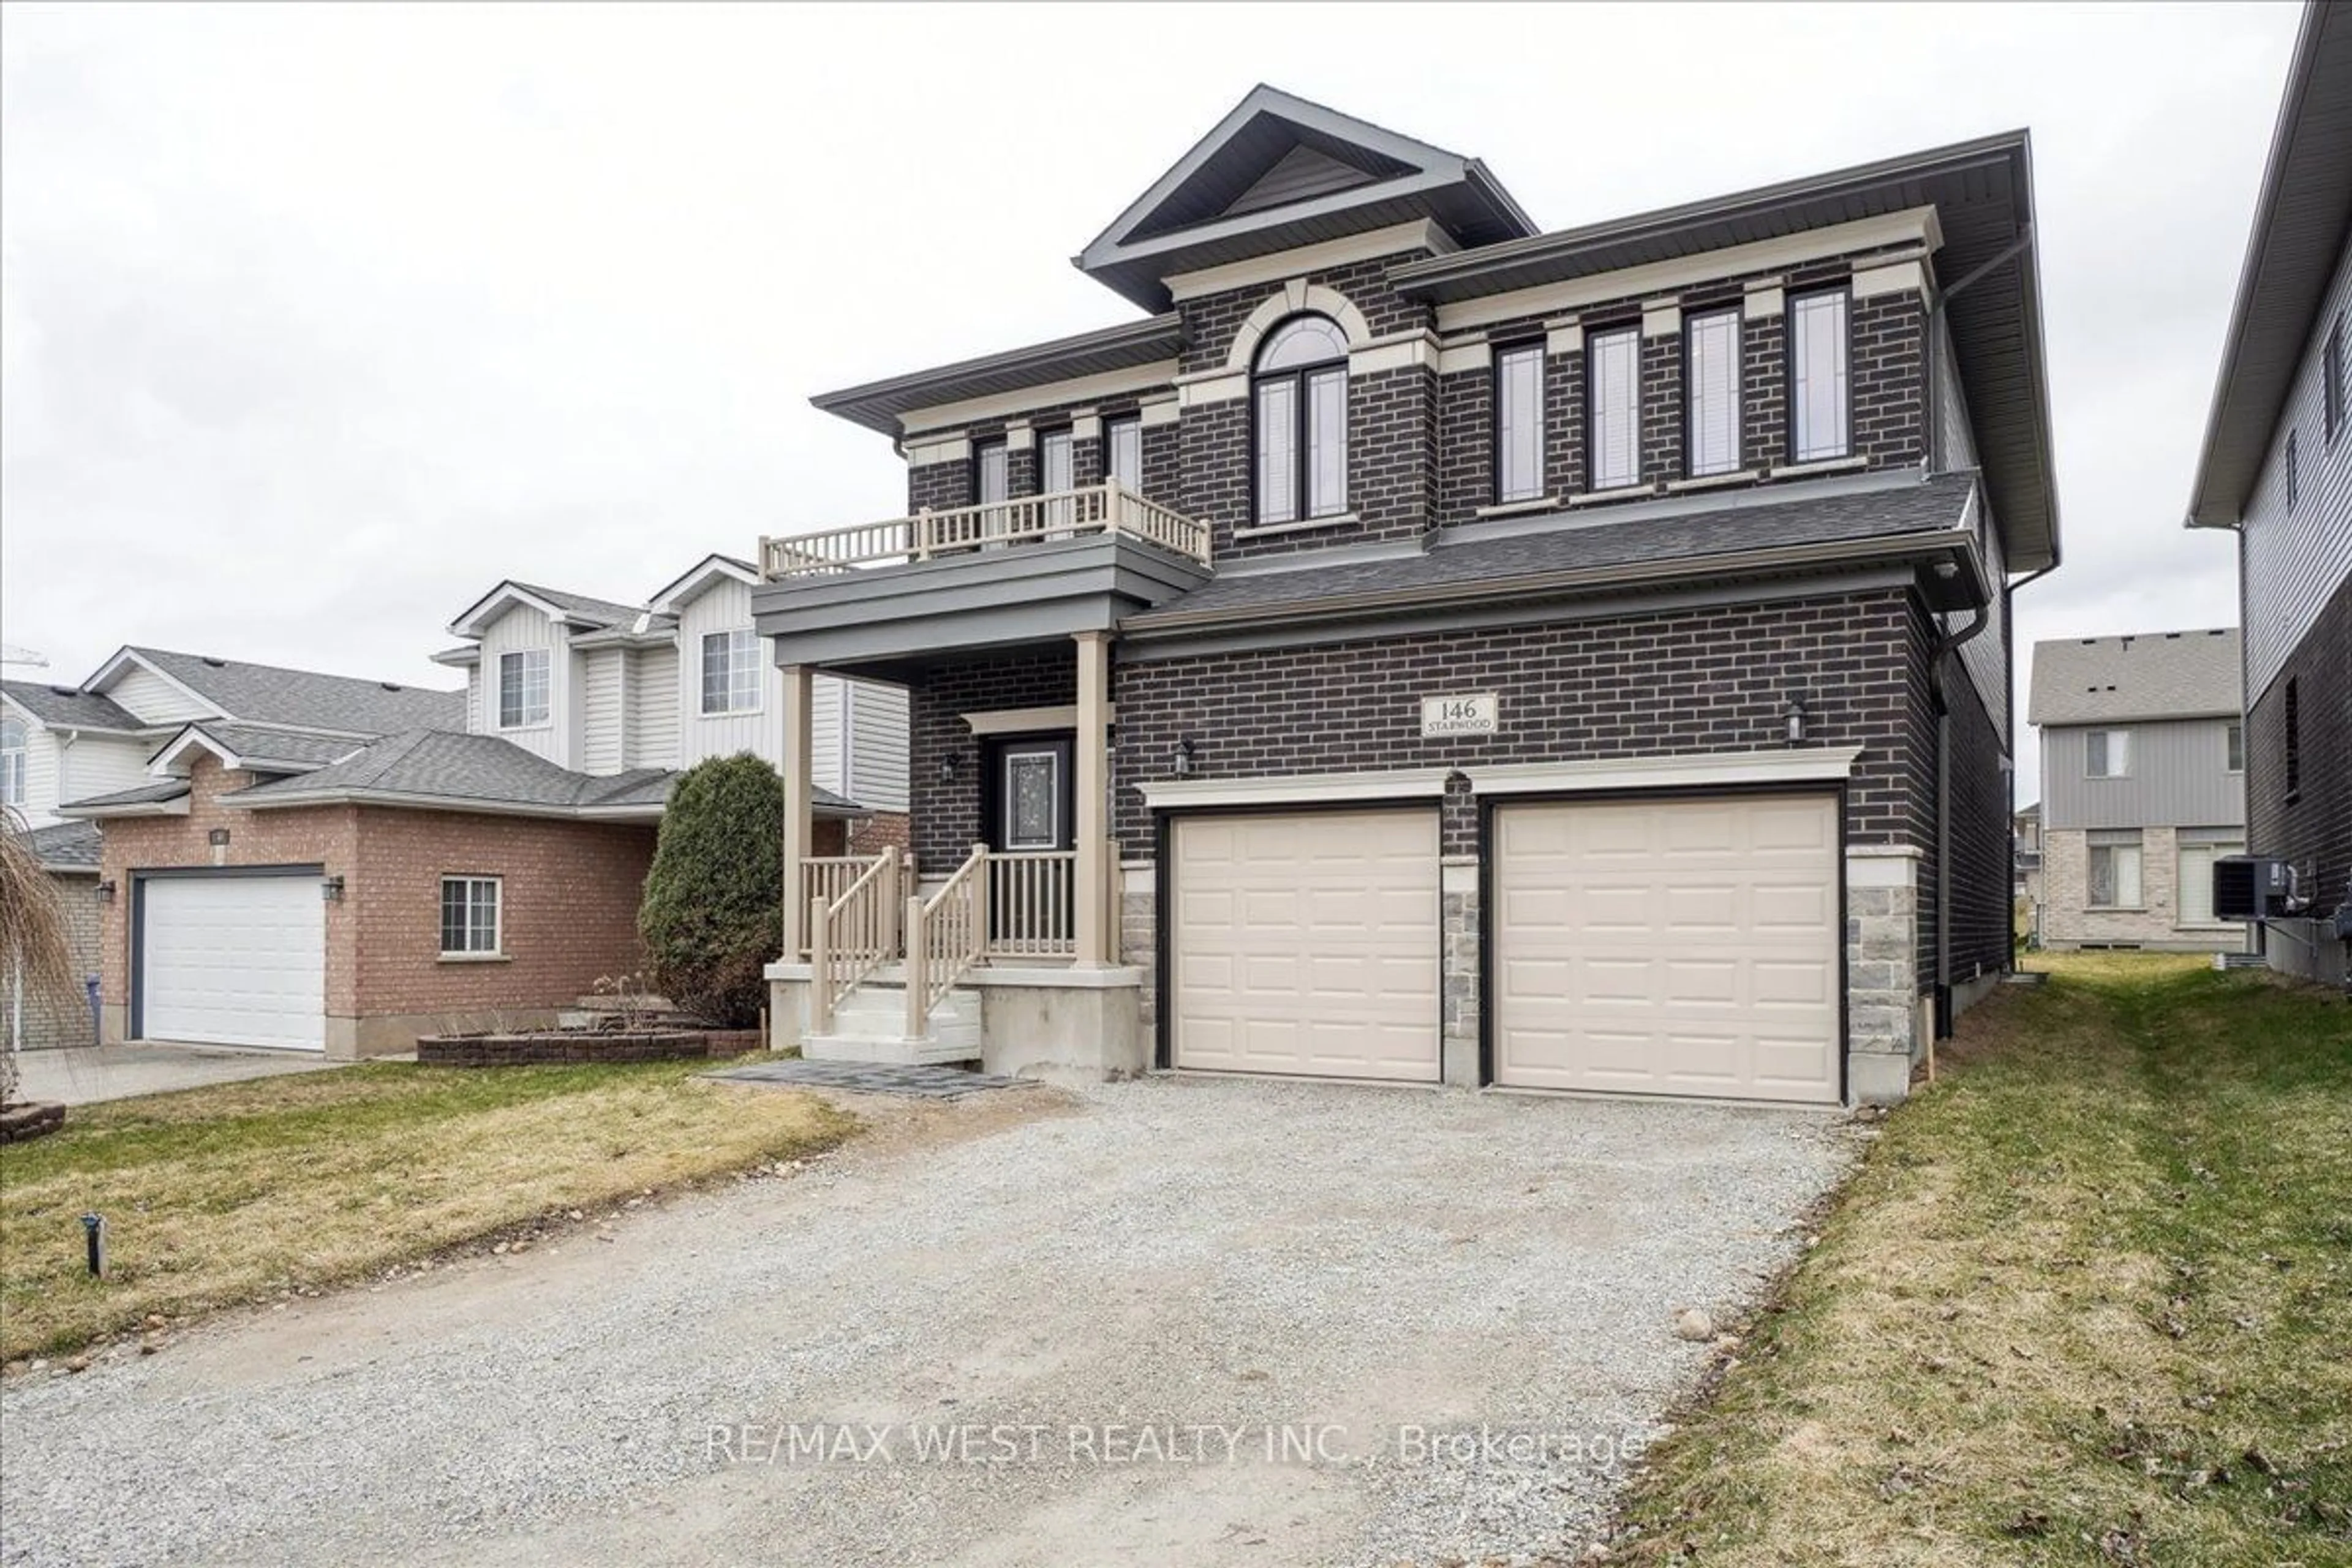 Home with brick exterior material for 146 Starwood Dr, Guelph Ontario N1E 7G7